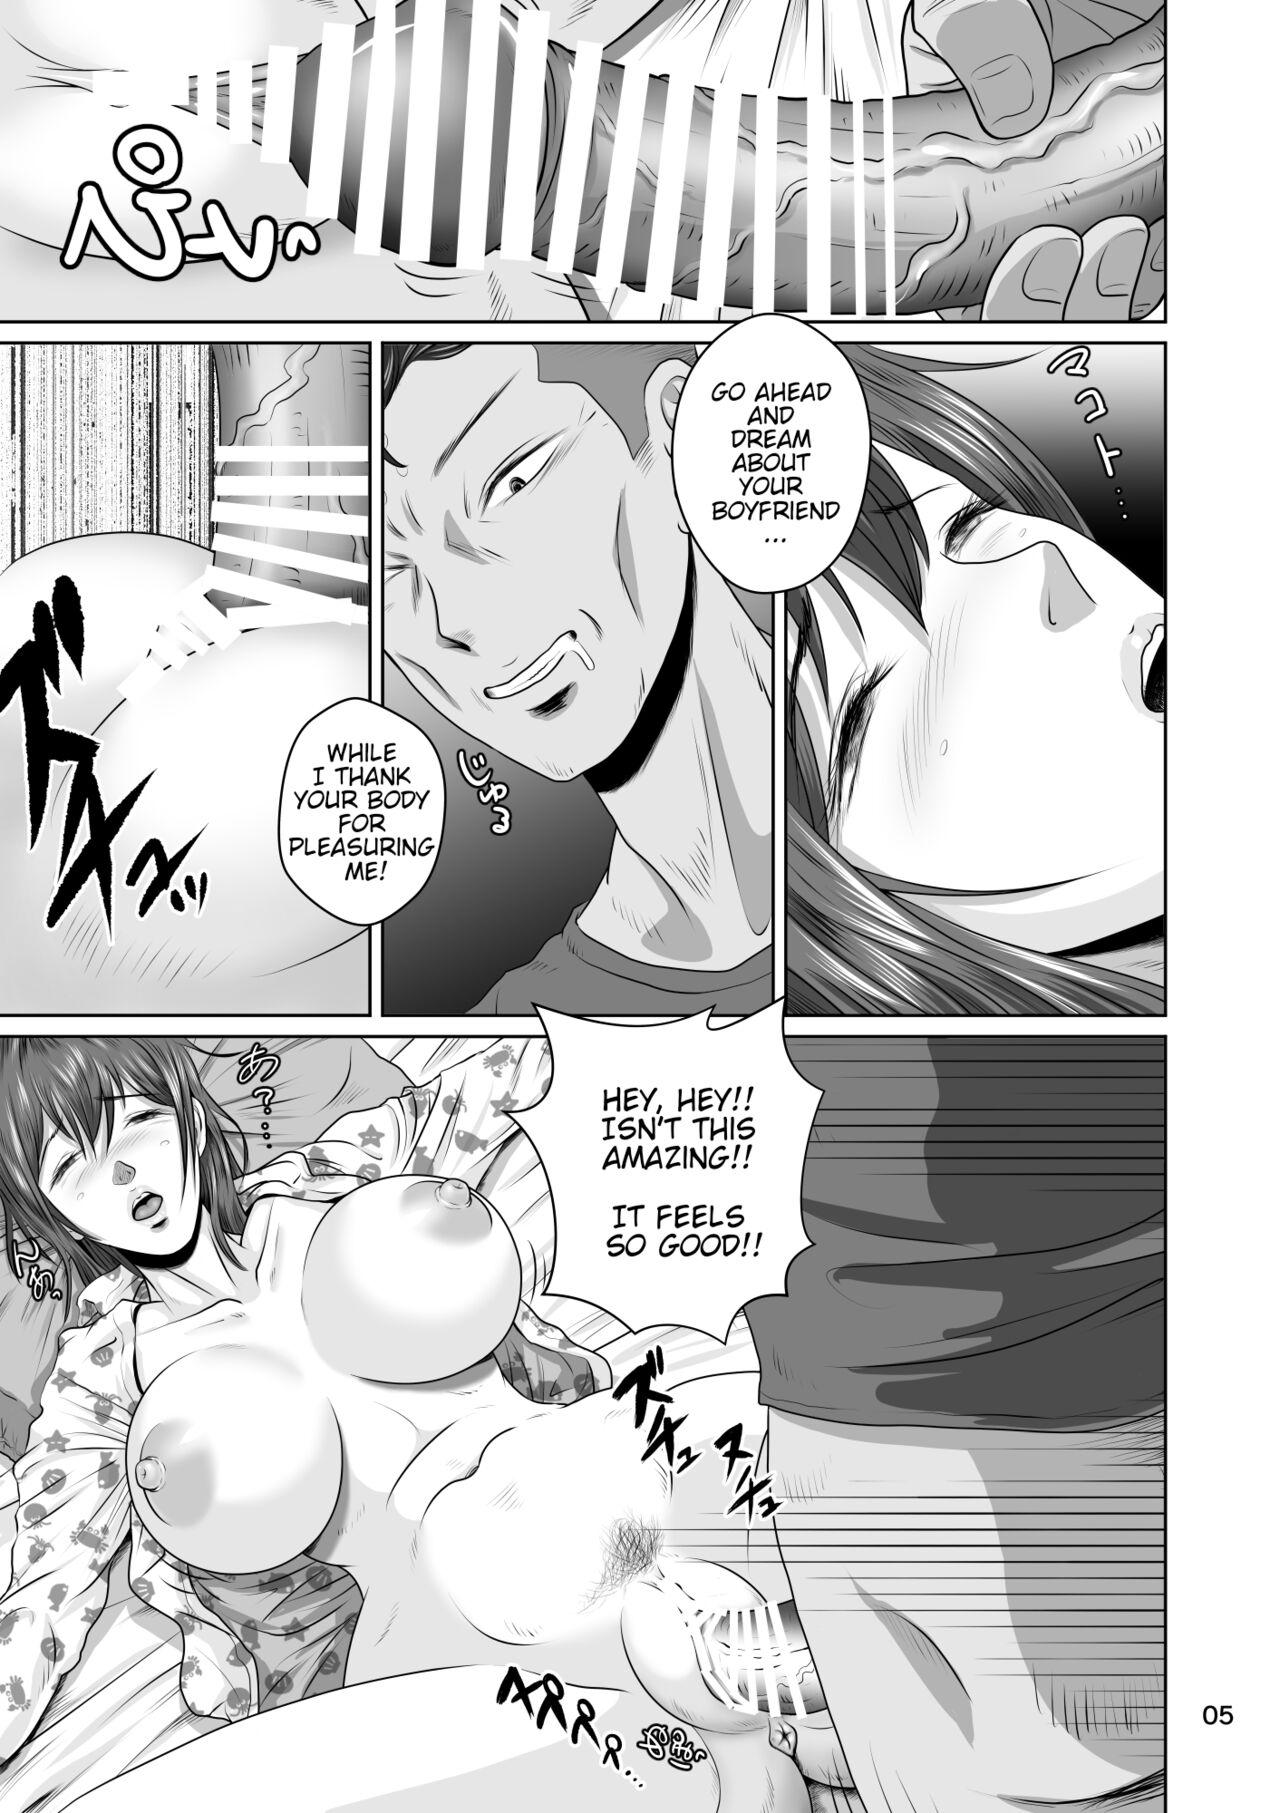 Best Blowjobs Ever [NTR System] Cuckold Childhood Friend, Haruka-Chans Crisis In Two-Shots!! Canadian - Page 6